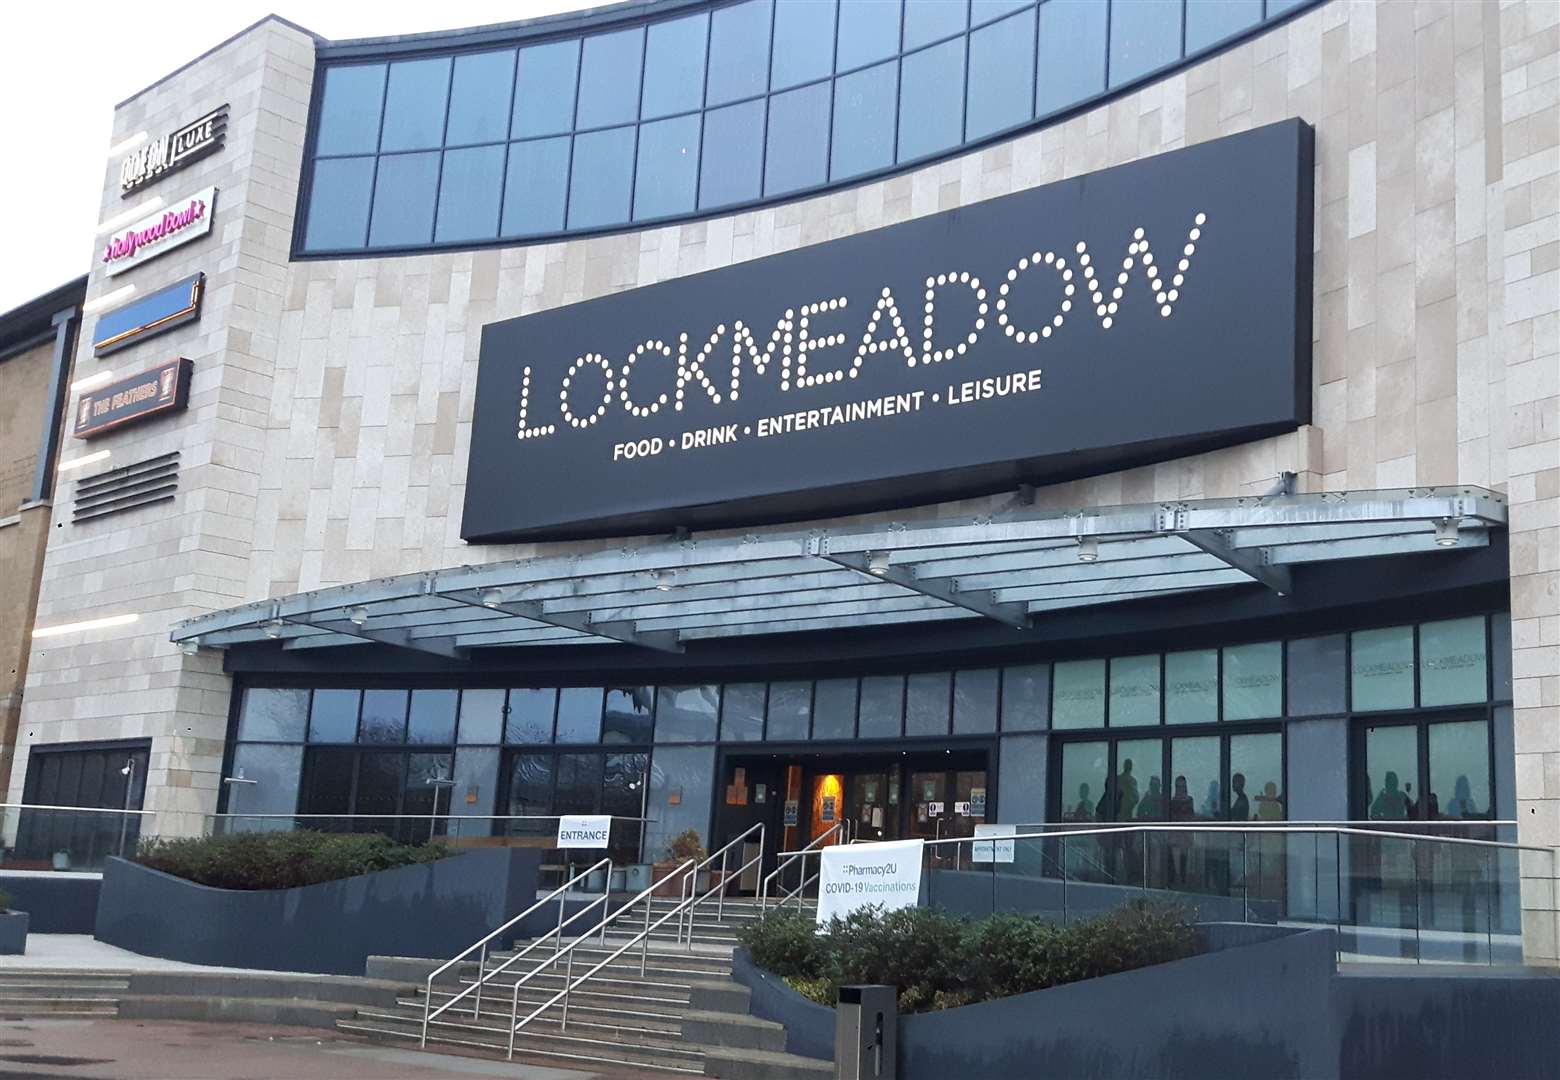 The Lockmeadow leisure complex in Maidstone